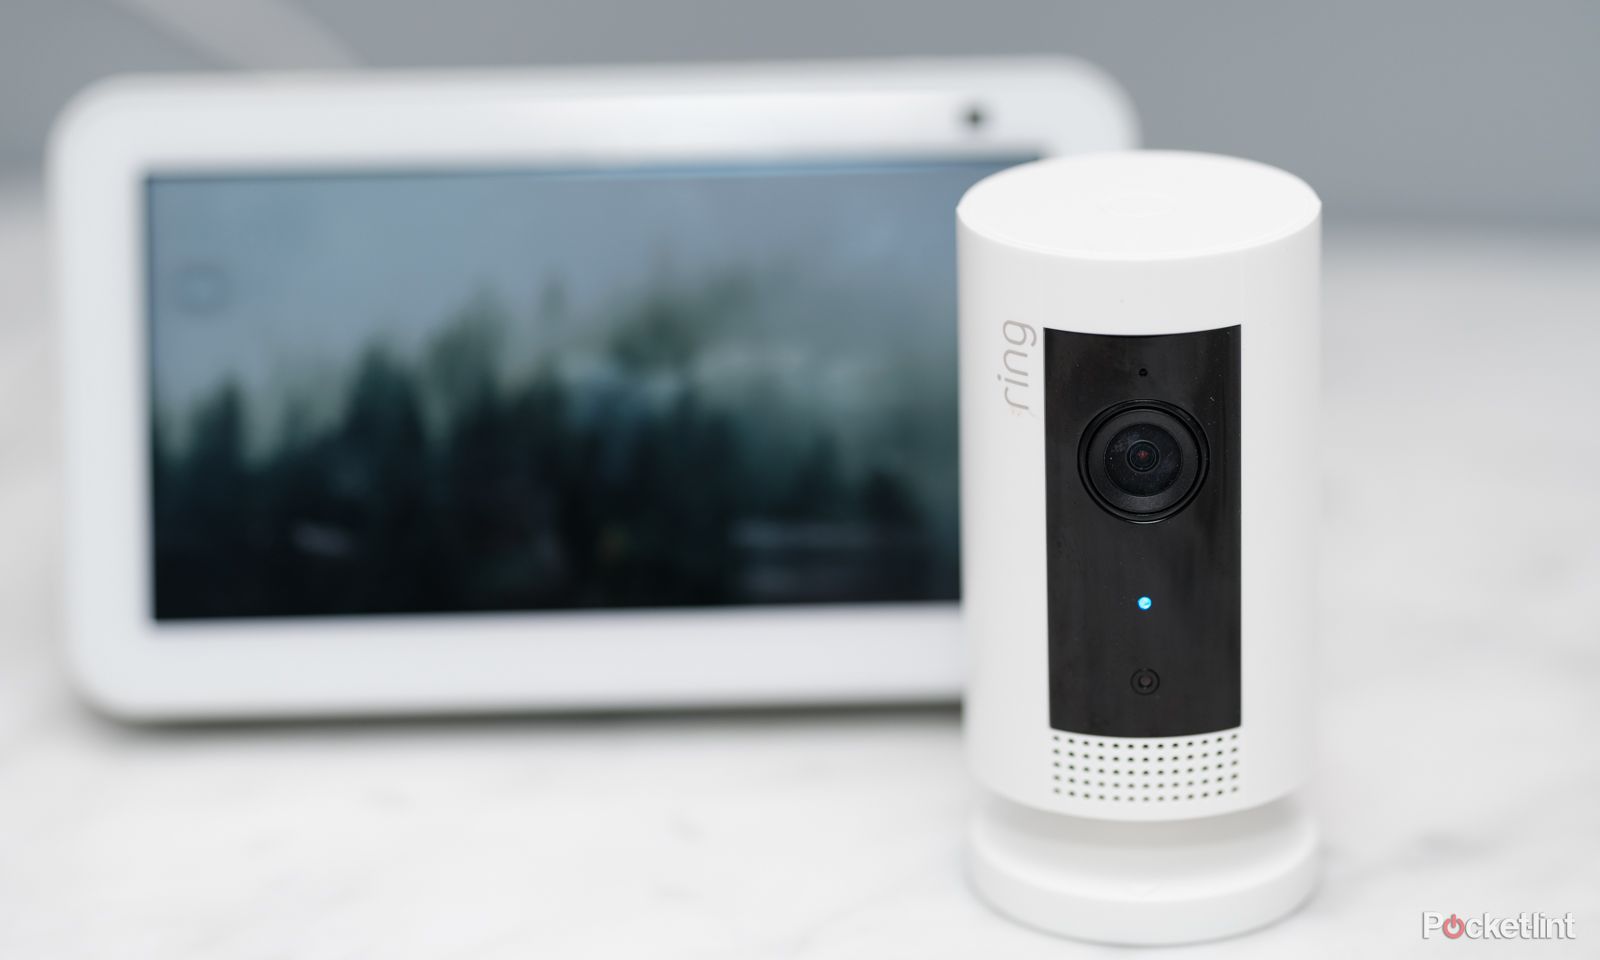 A Ring camera is shown next to an Echo Show